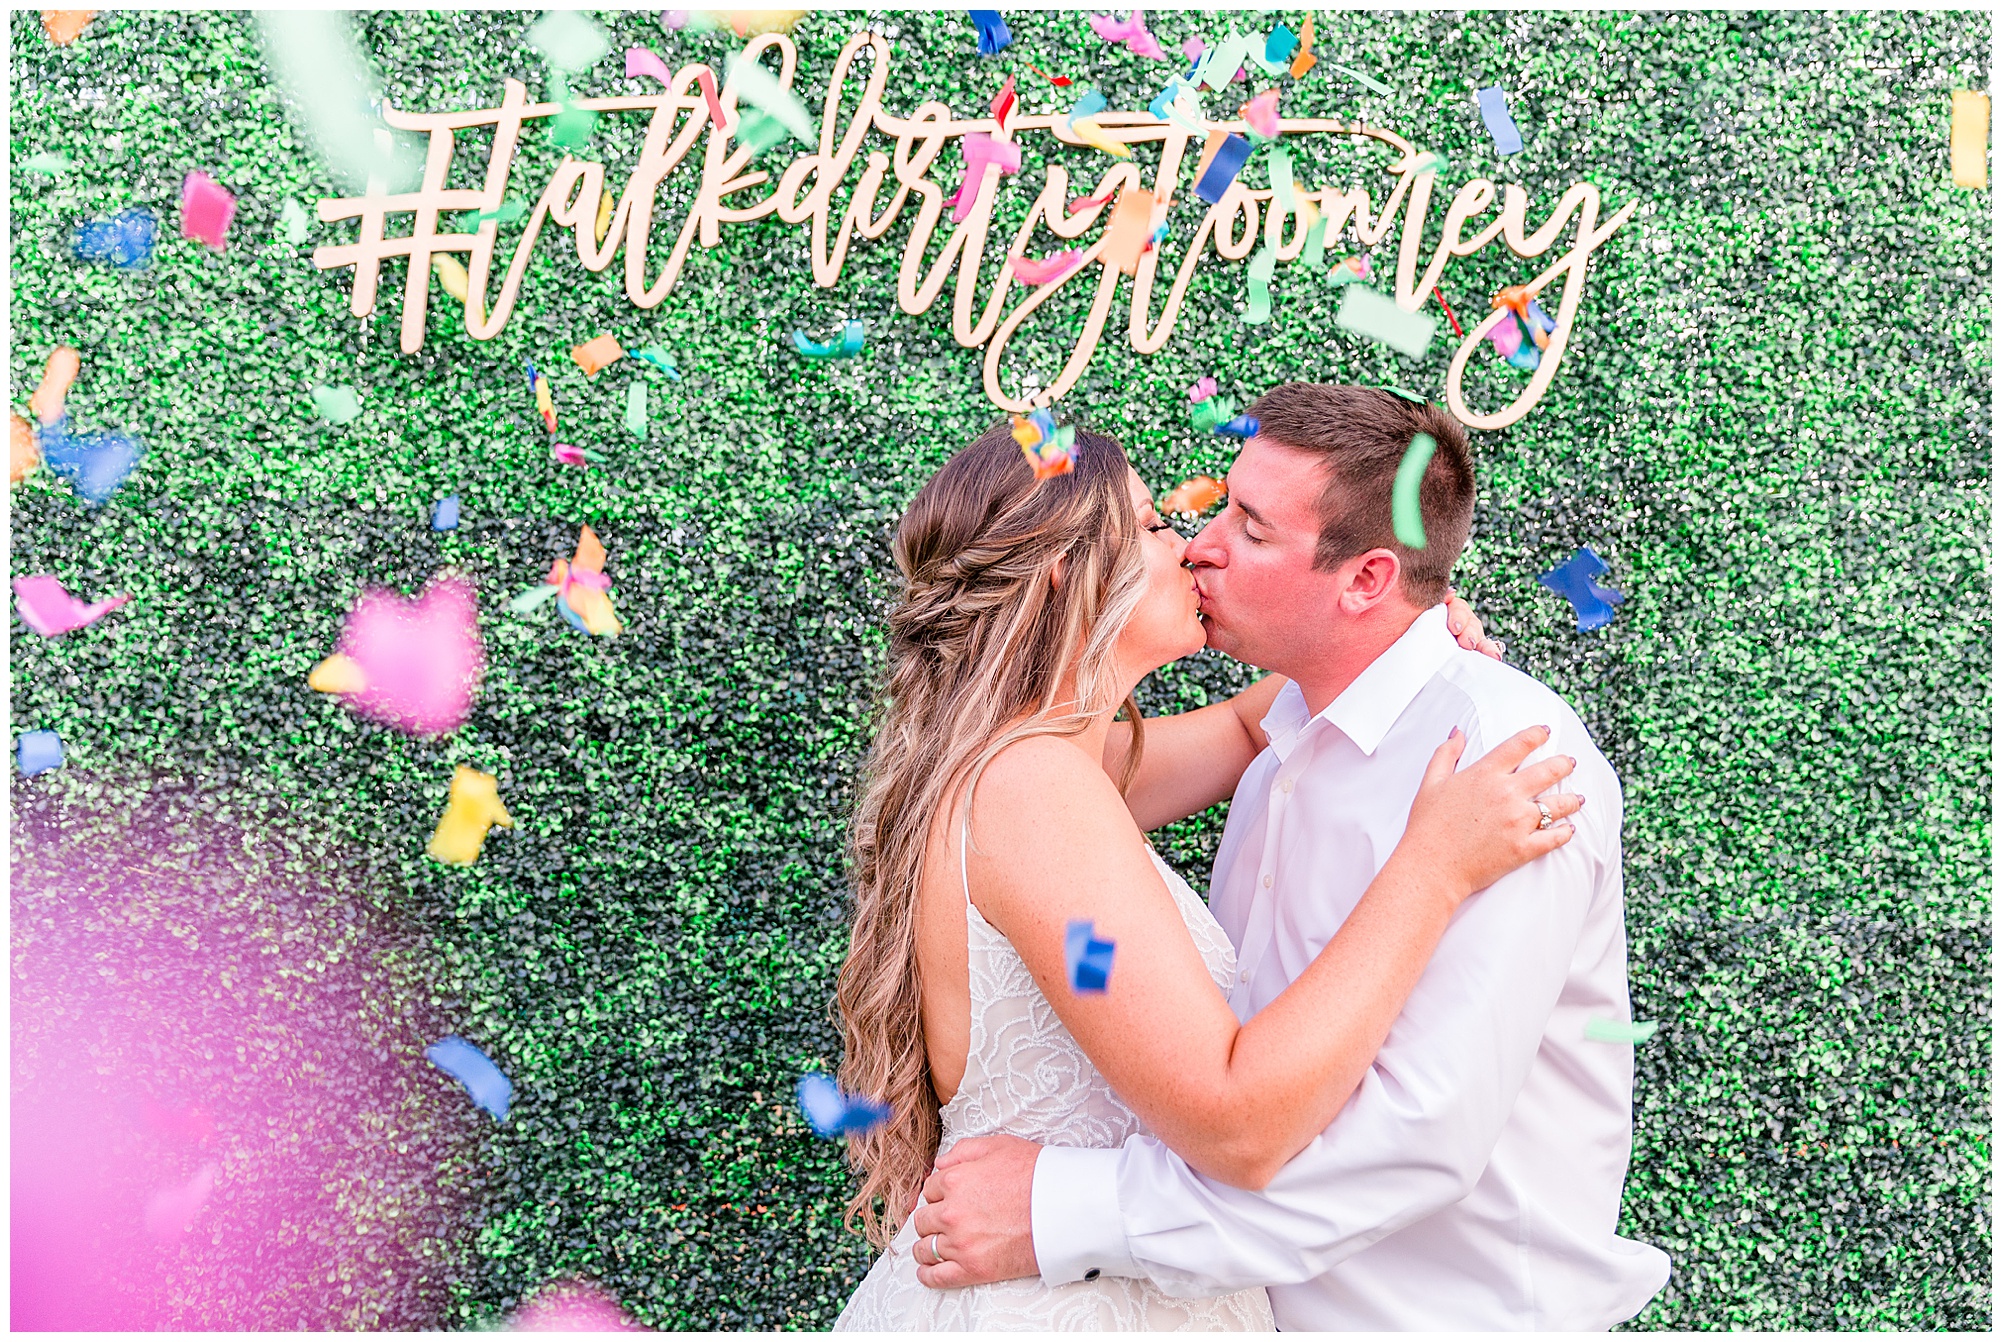 Wedding hashtag on backdrop behind kissing bride and groom. Photography by Cassidy MR Photography